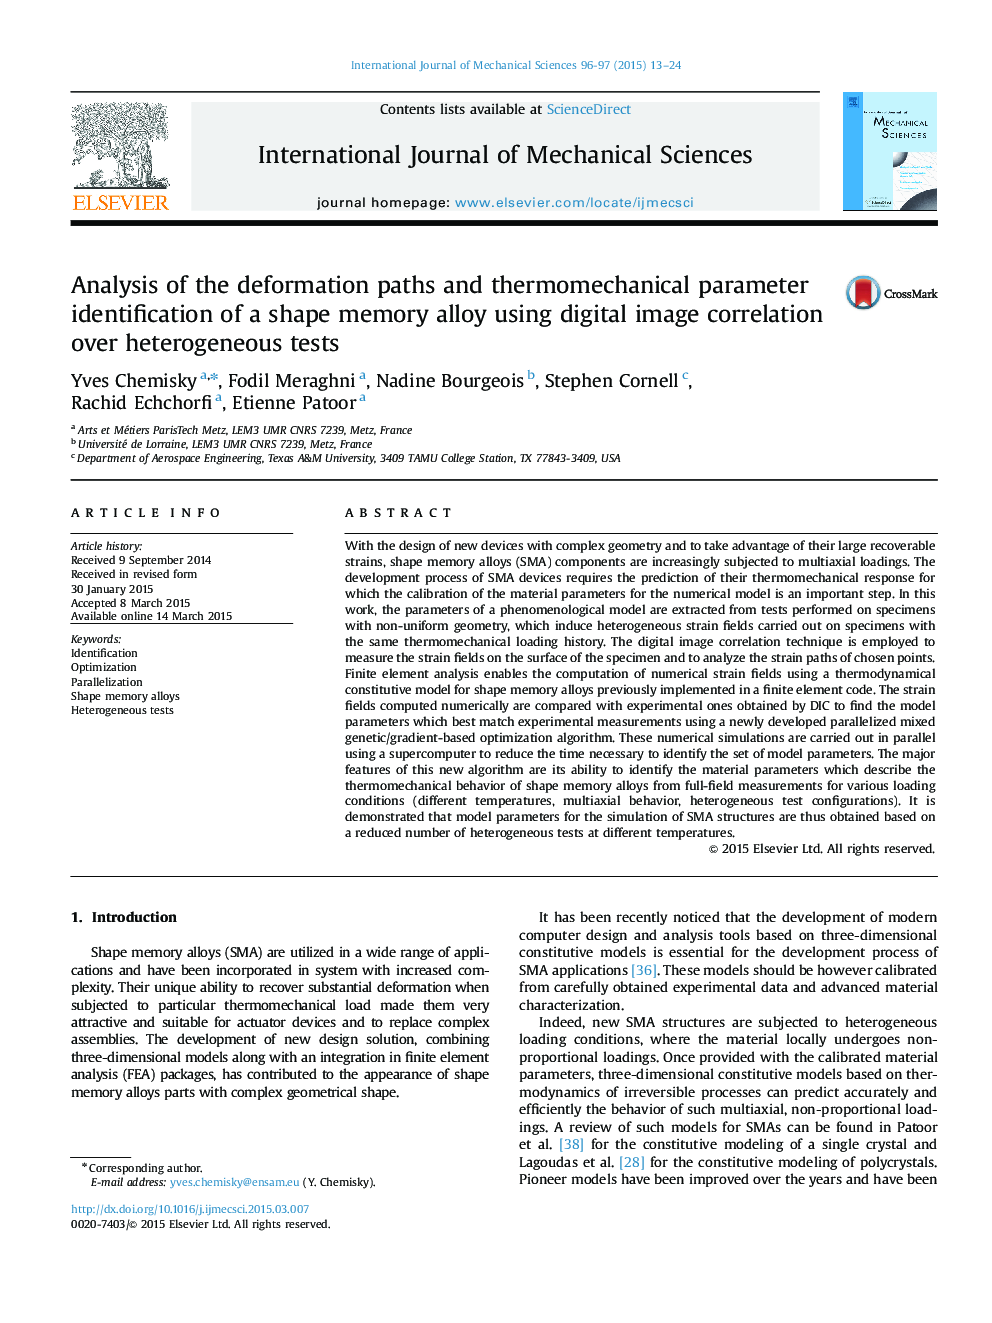 Analysis of the deformation paths and thermomechanical parameter identification of a shape memory alloy using digital image correlation over heterogeneous tests